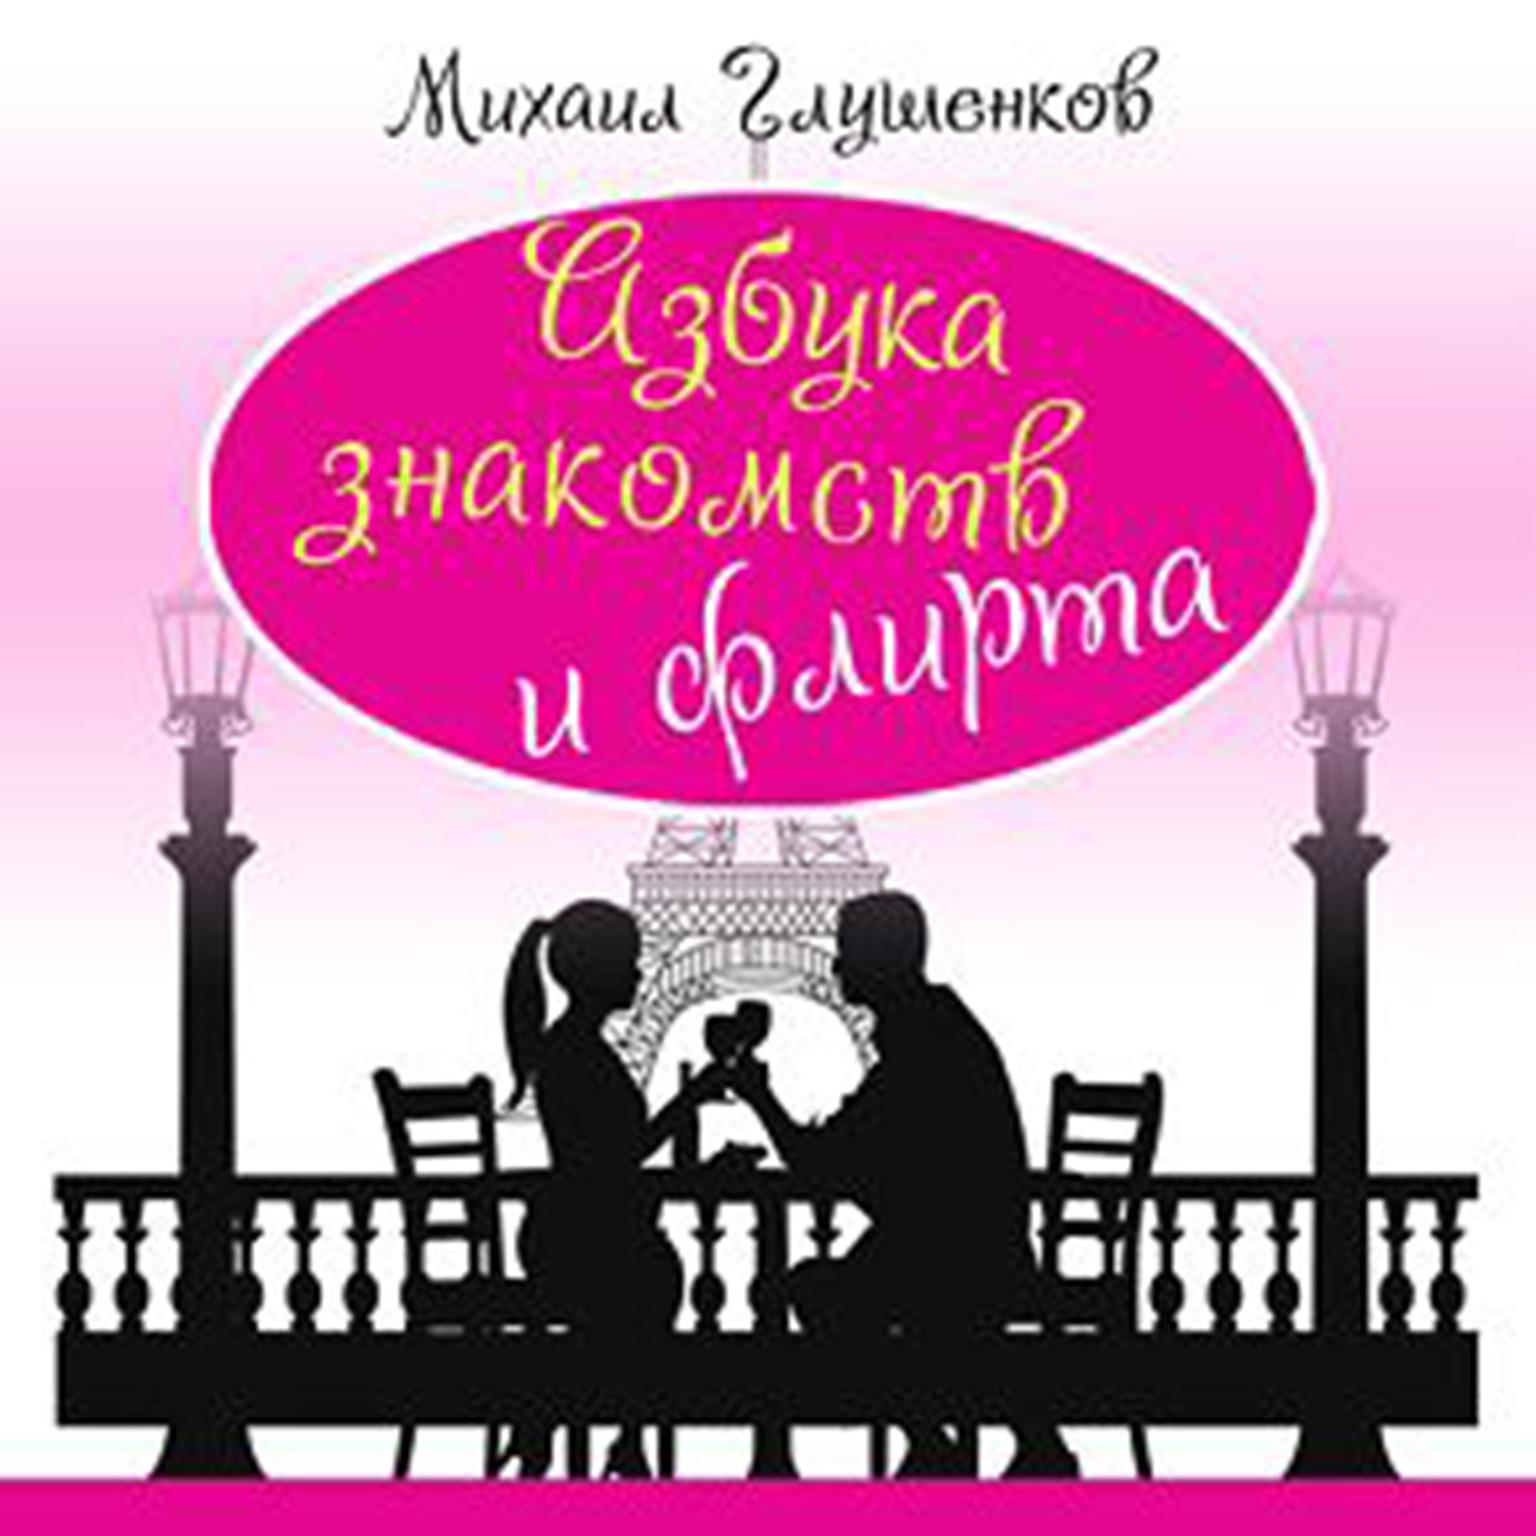 Encyclopedia of Dating and Flirting [Russian Edition] Audiobook, by Mihail Glushenkov